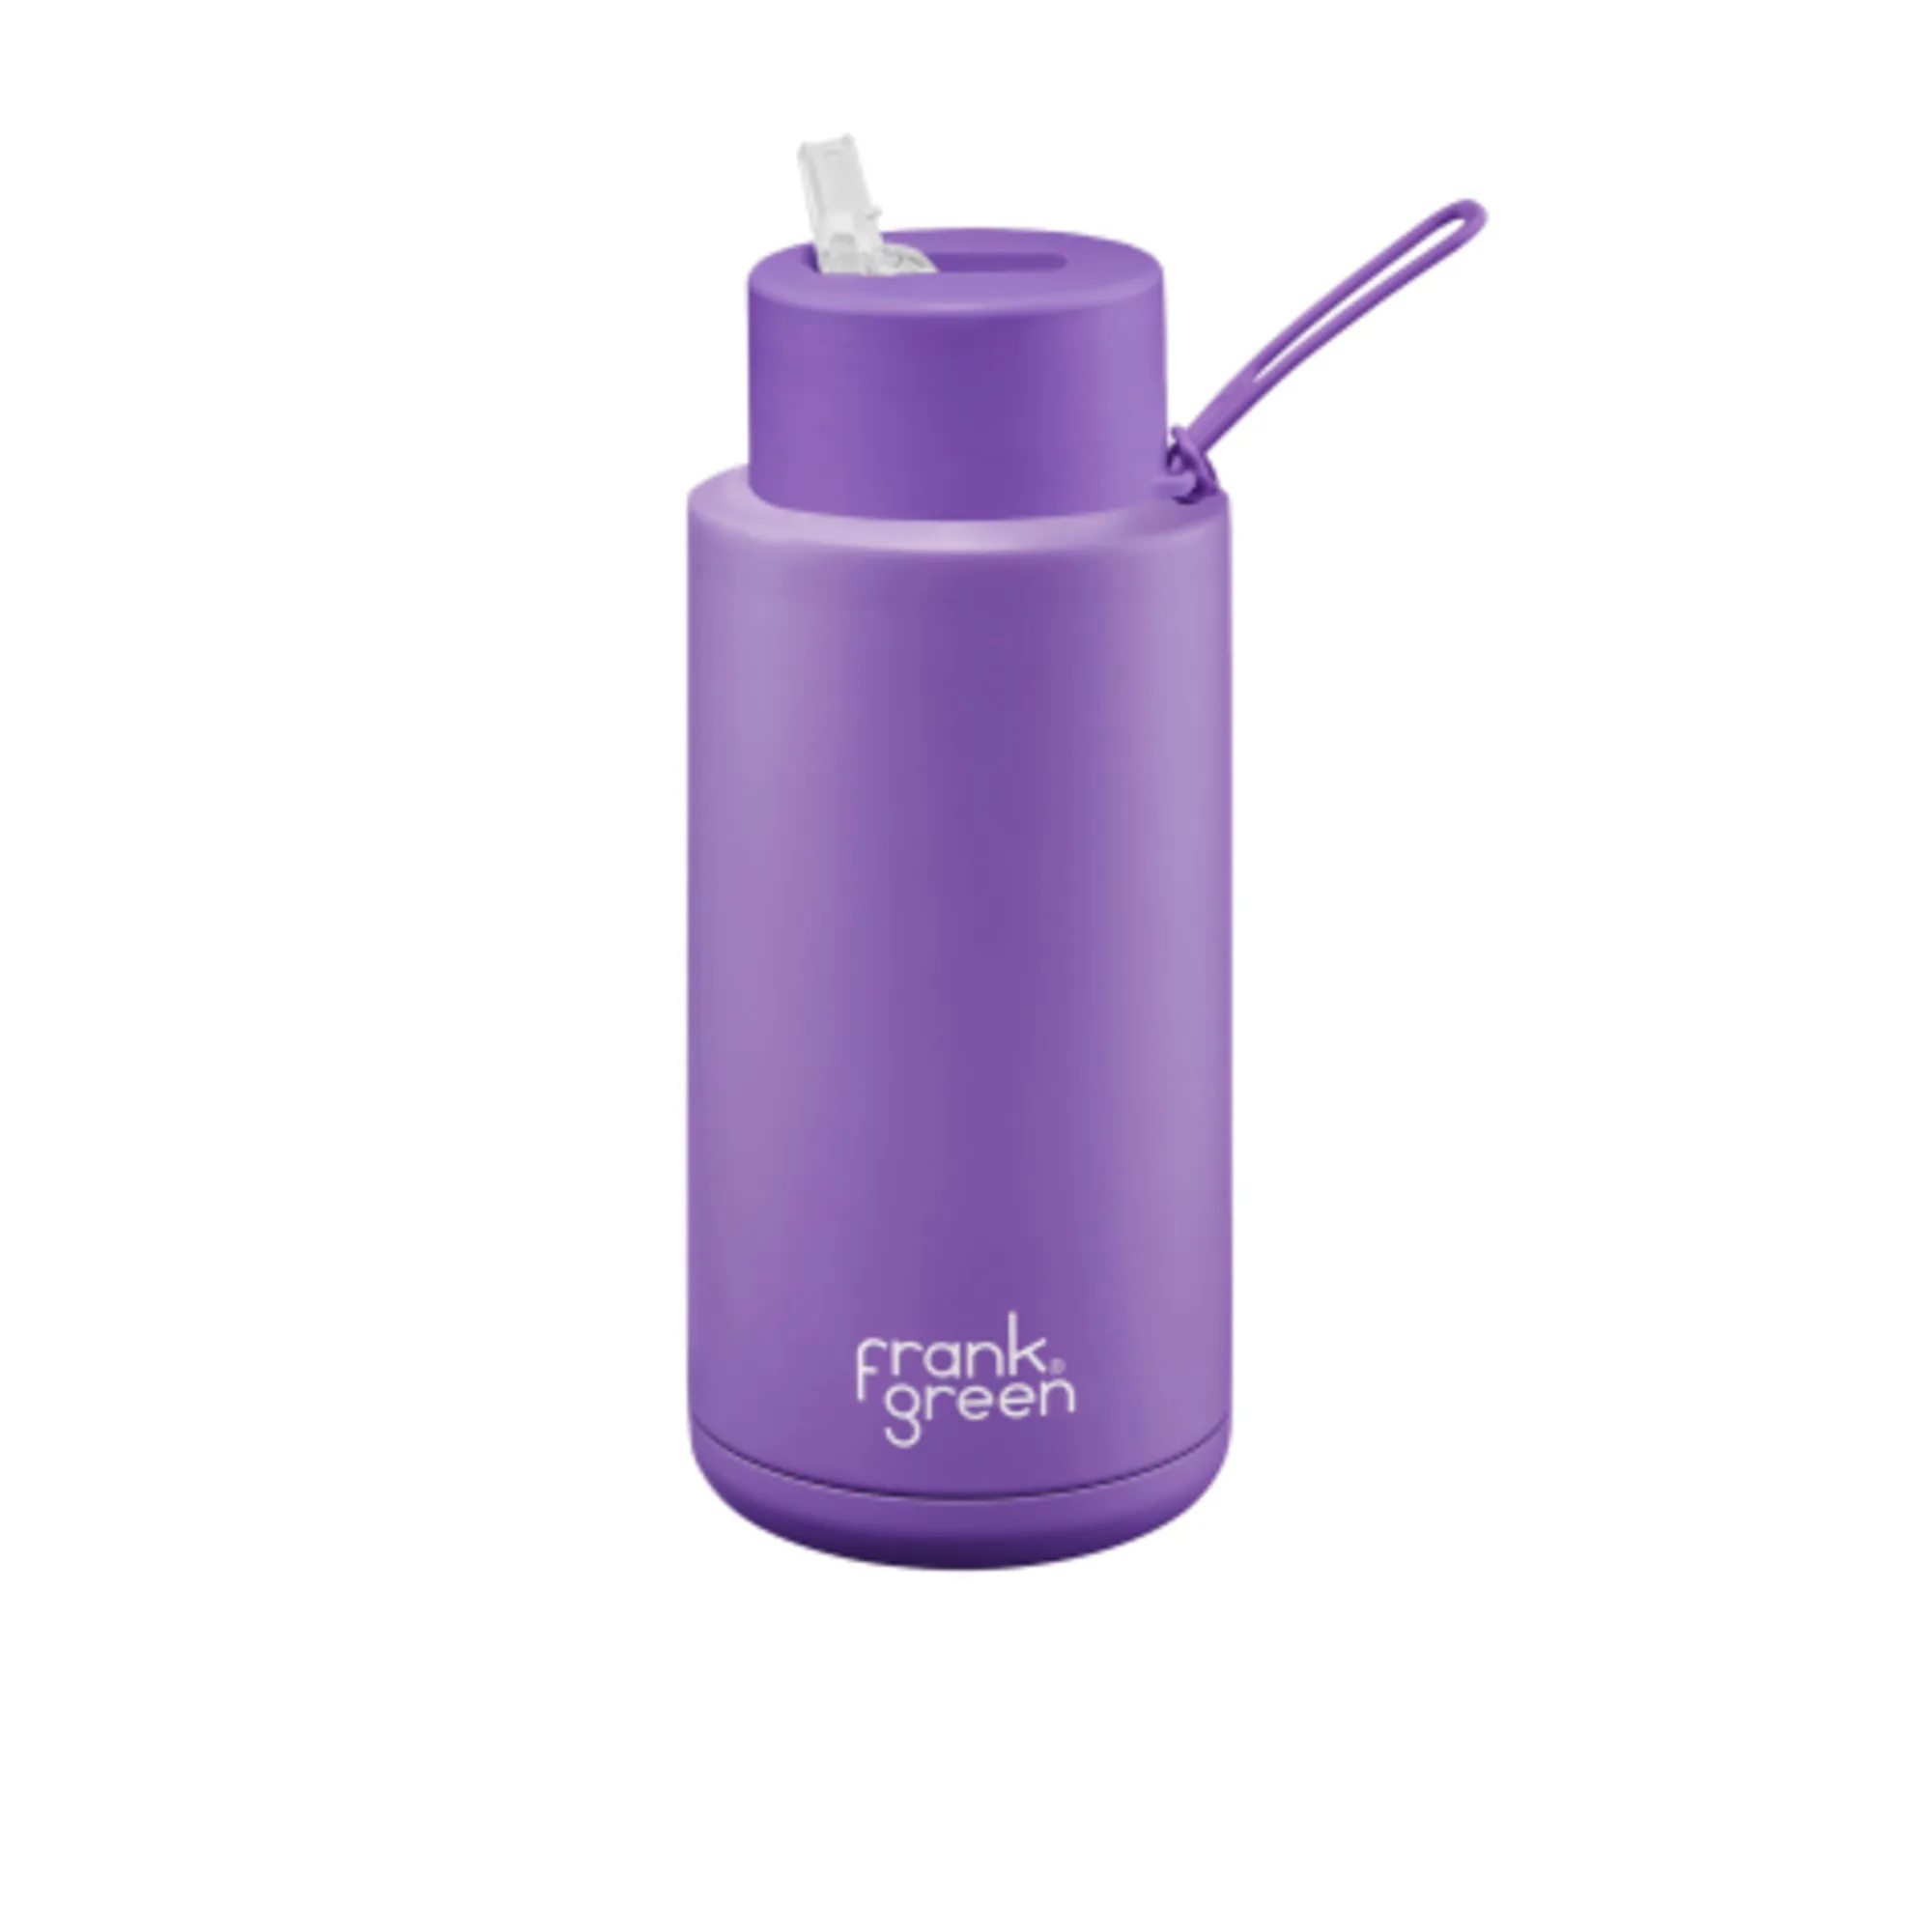 Frank Green Ultimate Ceramic Reusable Bottle with Straw 1L (34oz) Cosmic Purple Image 1